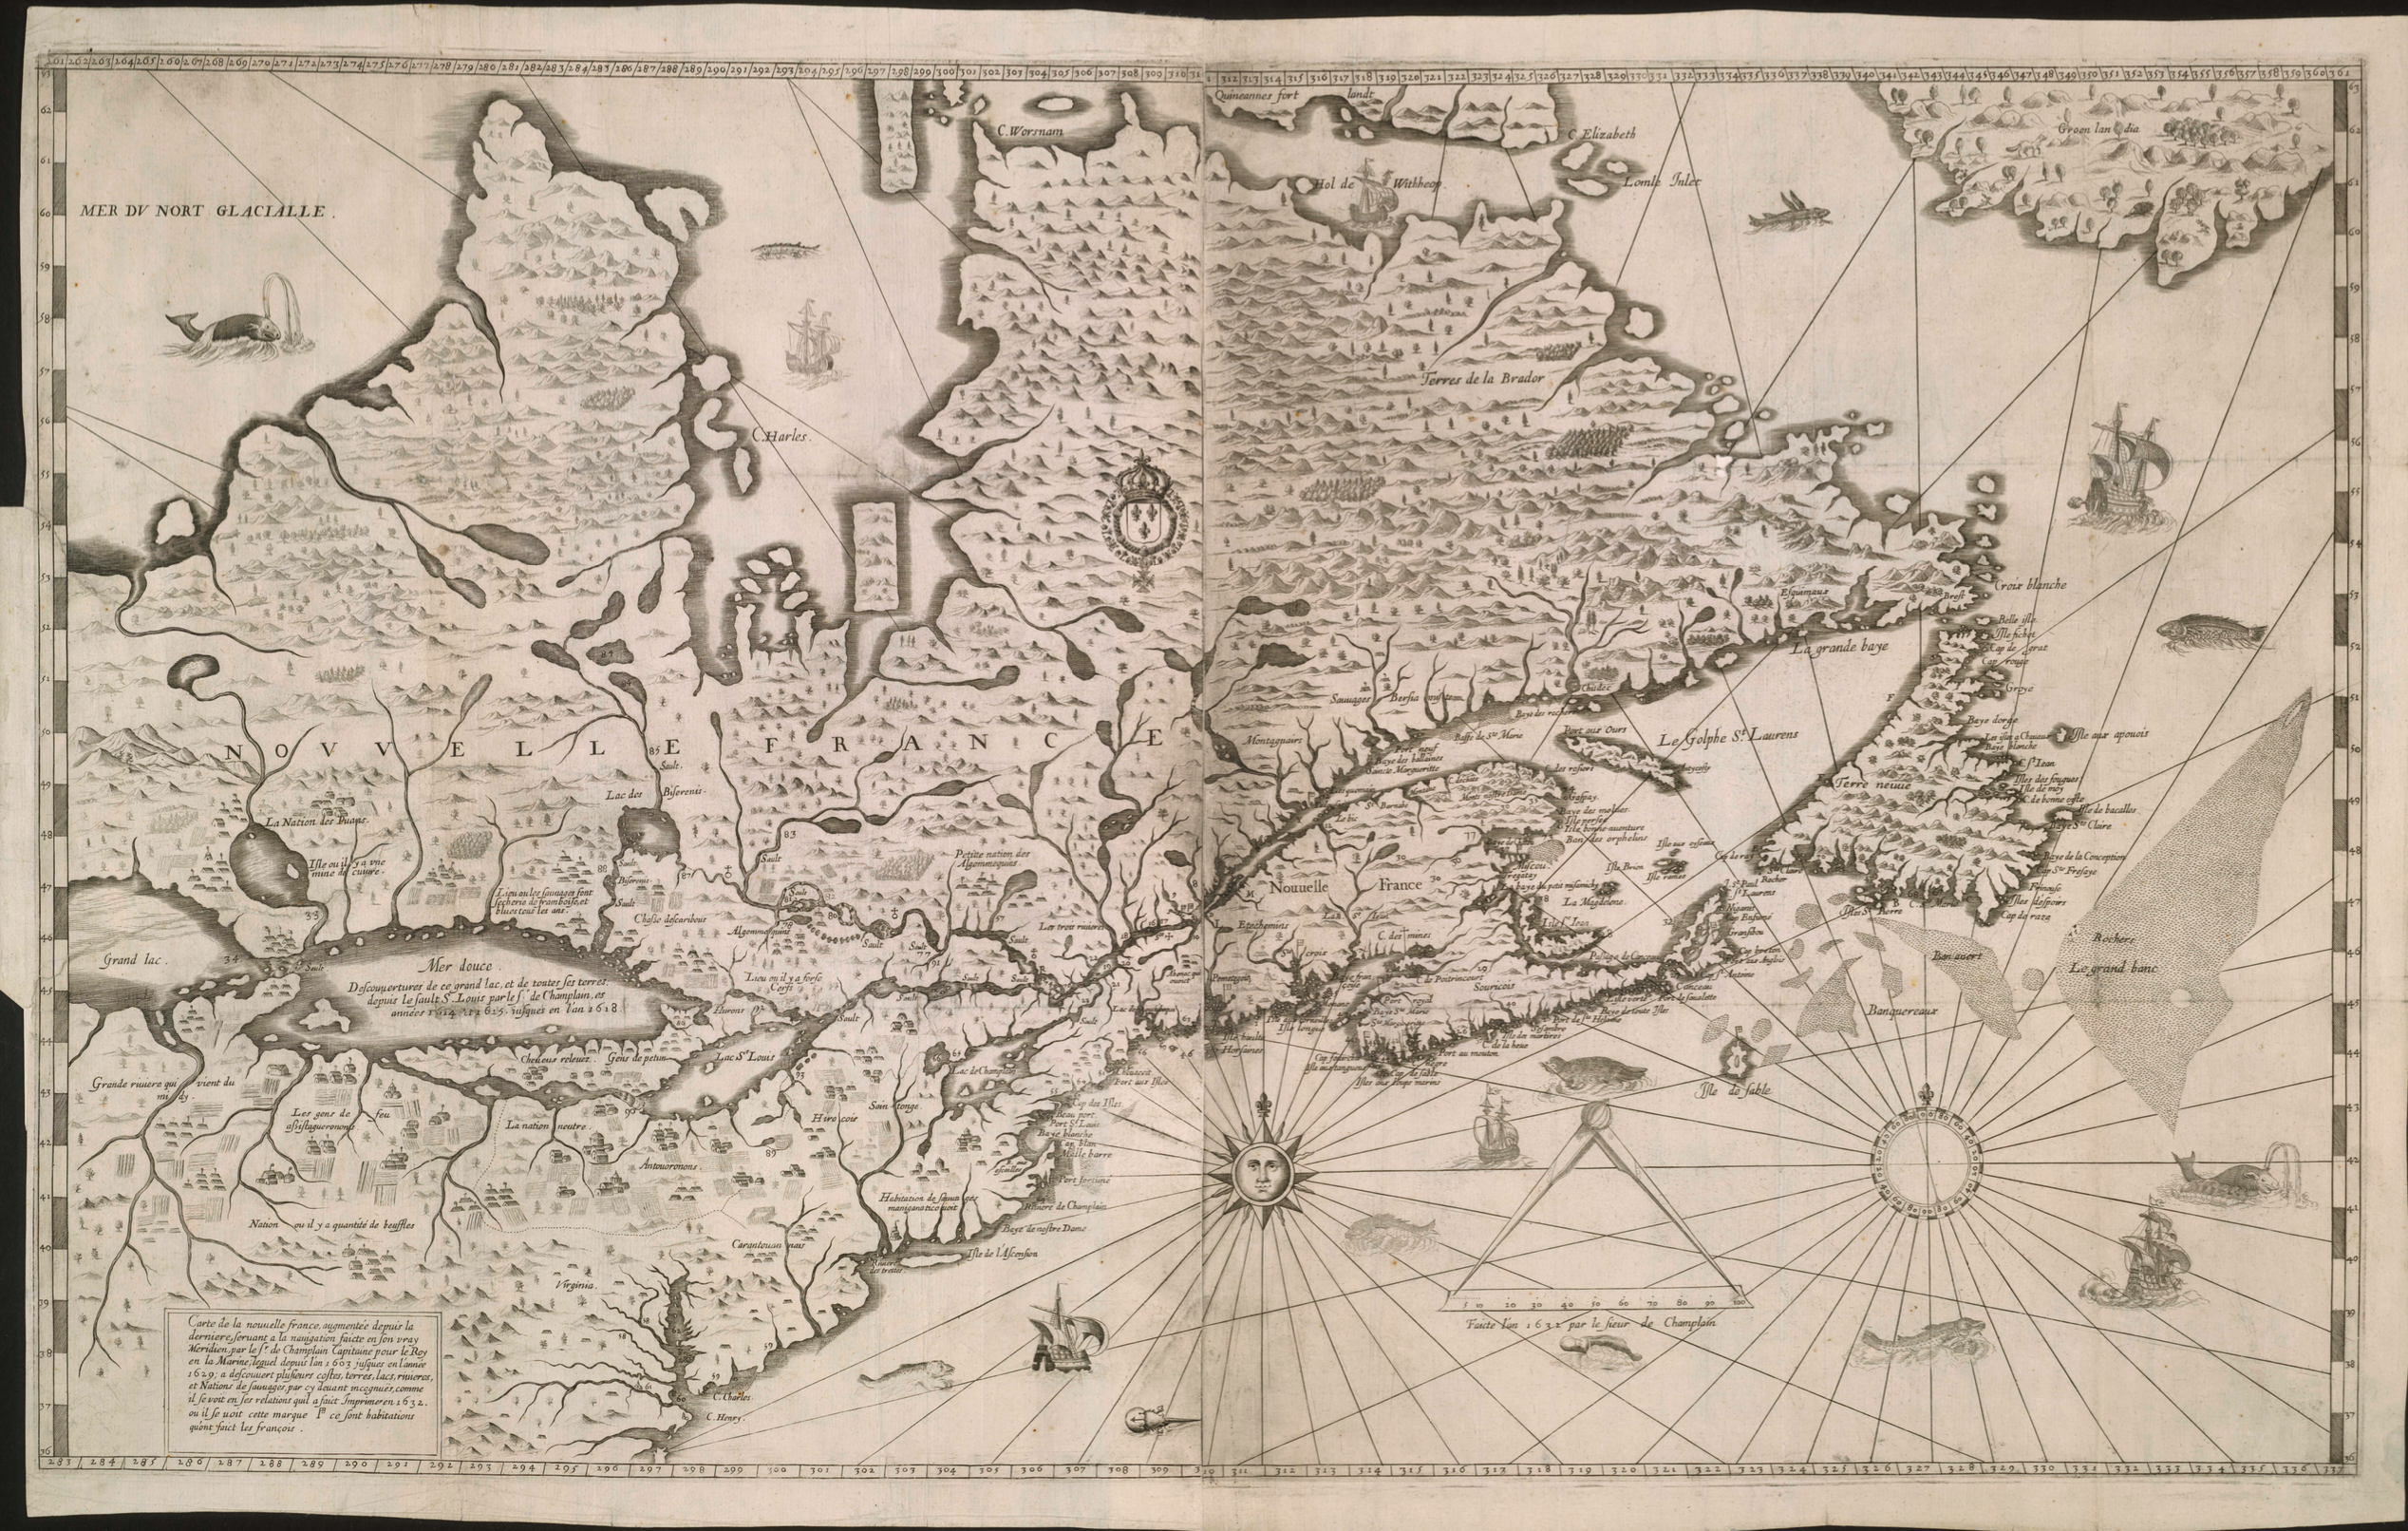 Full view of the 1632 north america map drawn by Samuel de Champlain